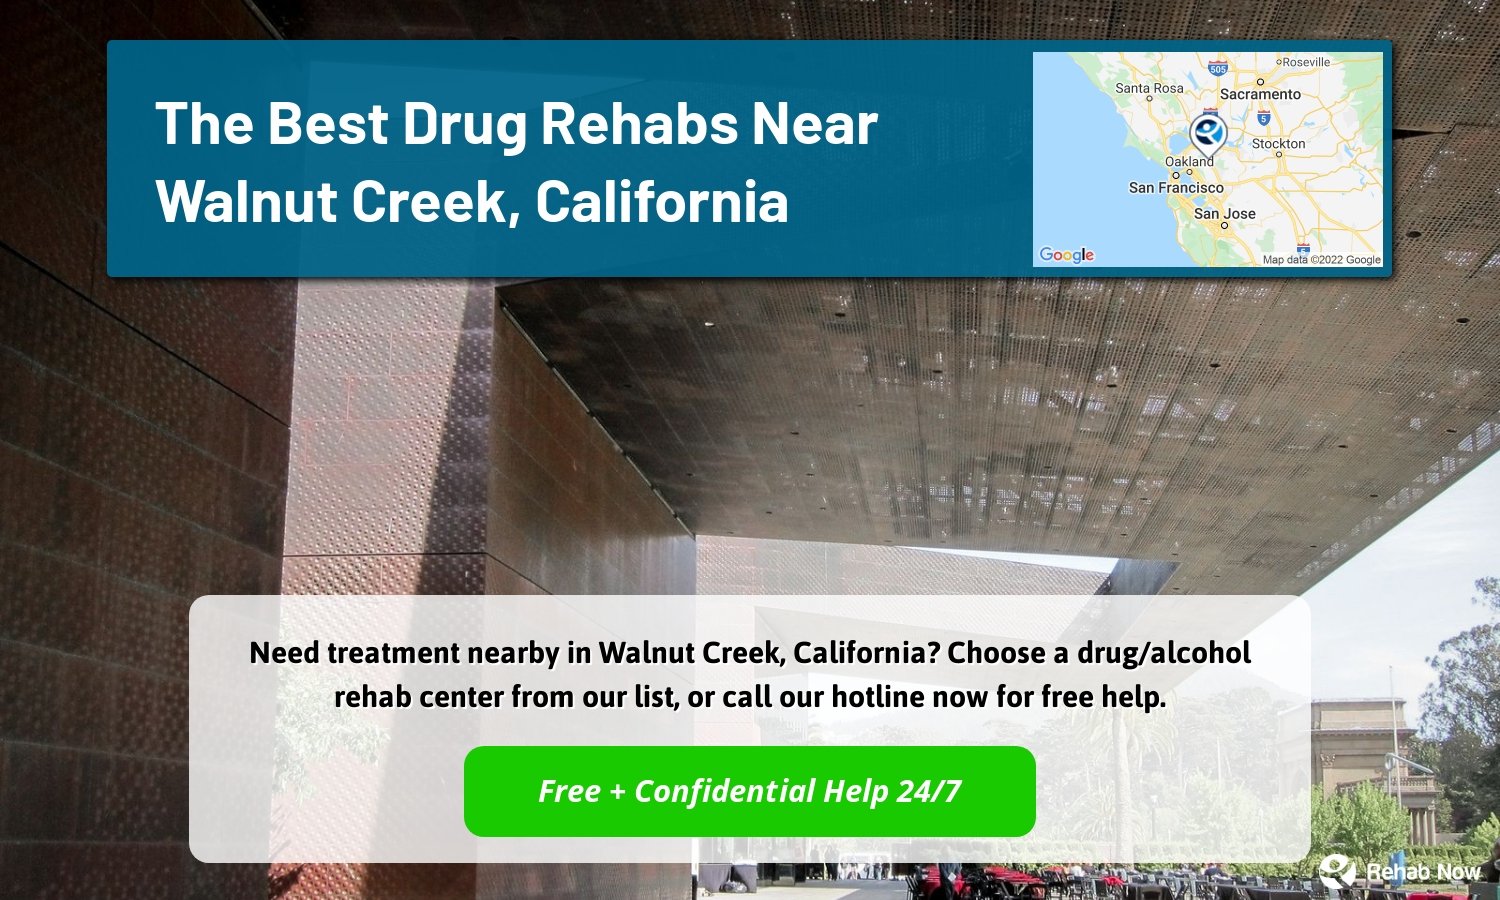 Need treatment nearby in Walnut Creek, California? Choose a drug/alcohol rehab center from our list, or call our hotline now for free help.